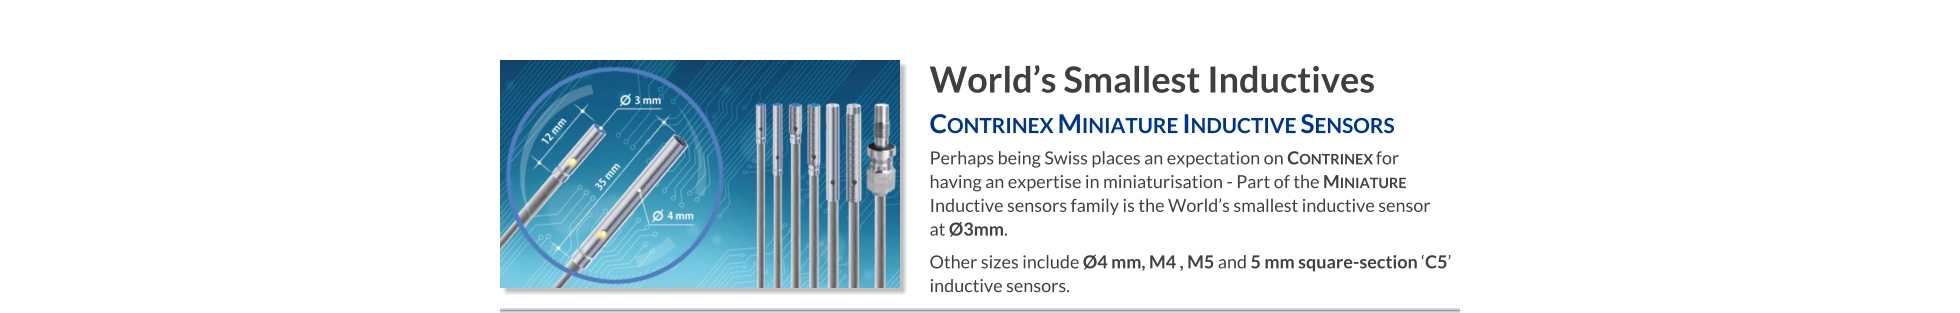 World’s Smallest Inductives Contrinex Miniature Inductive Sensors   Perhaps being Swiss places an expectation on Contrinex for having an expertise in miniaturisation - Part of the Miniature Inductive sensors family is the World’s smallest inductive sensor  at Ø3mm. Other sizes include Ø4 mm, M4 , M5 and 5 mm square-section ‘C5’ inductive sensors.